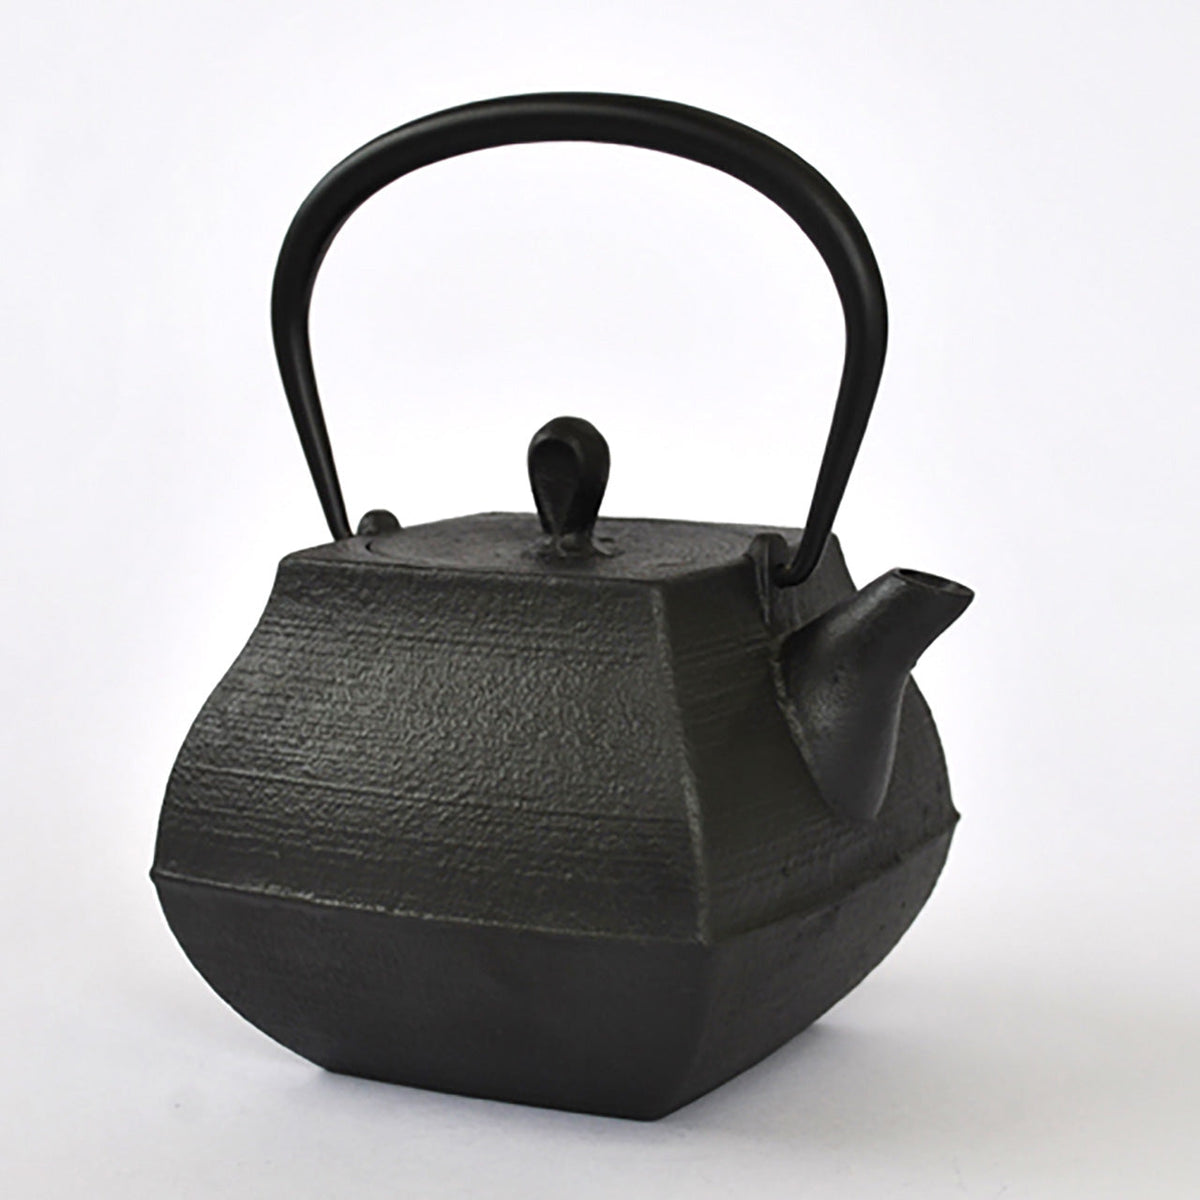 Introducing The Iconics Collection: Bakeware & Tea Kettle